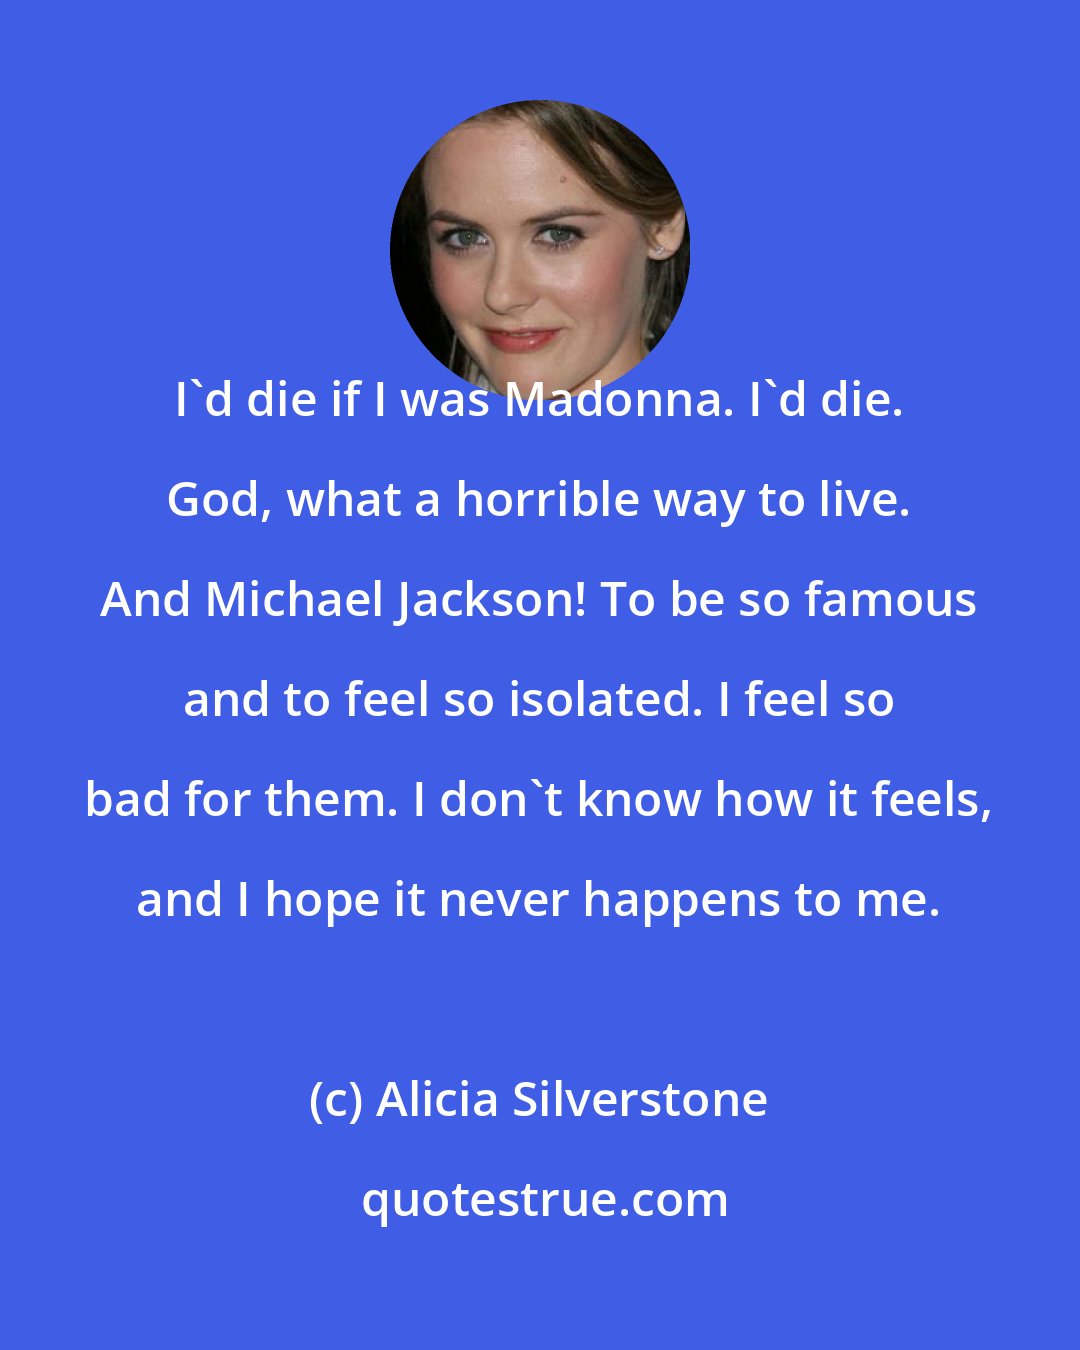 Alicia Silverstone: I'd die if I was Madonna. I'd die. God, what a horrible way to live. And Michael Jackson! To be so famous and to feel so isolated. I feel so bad for them. I don't know how it feels, and I hope it never happens to me.